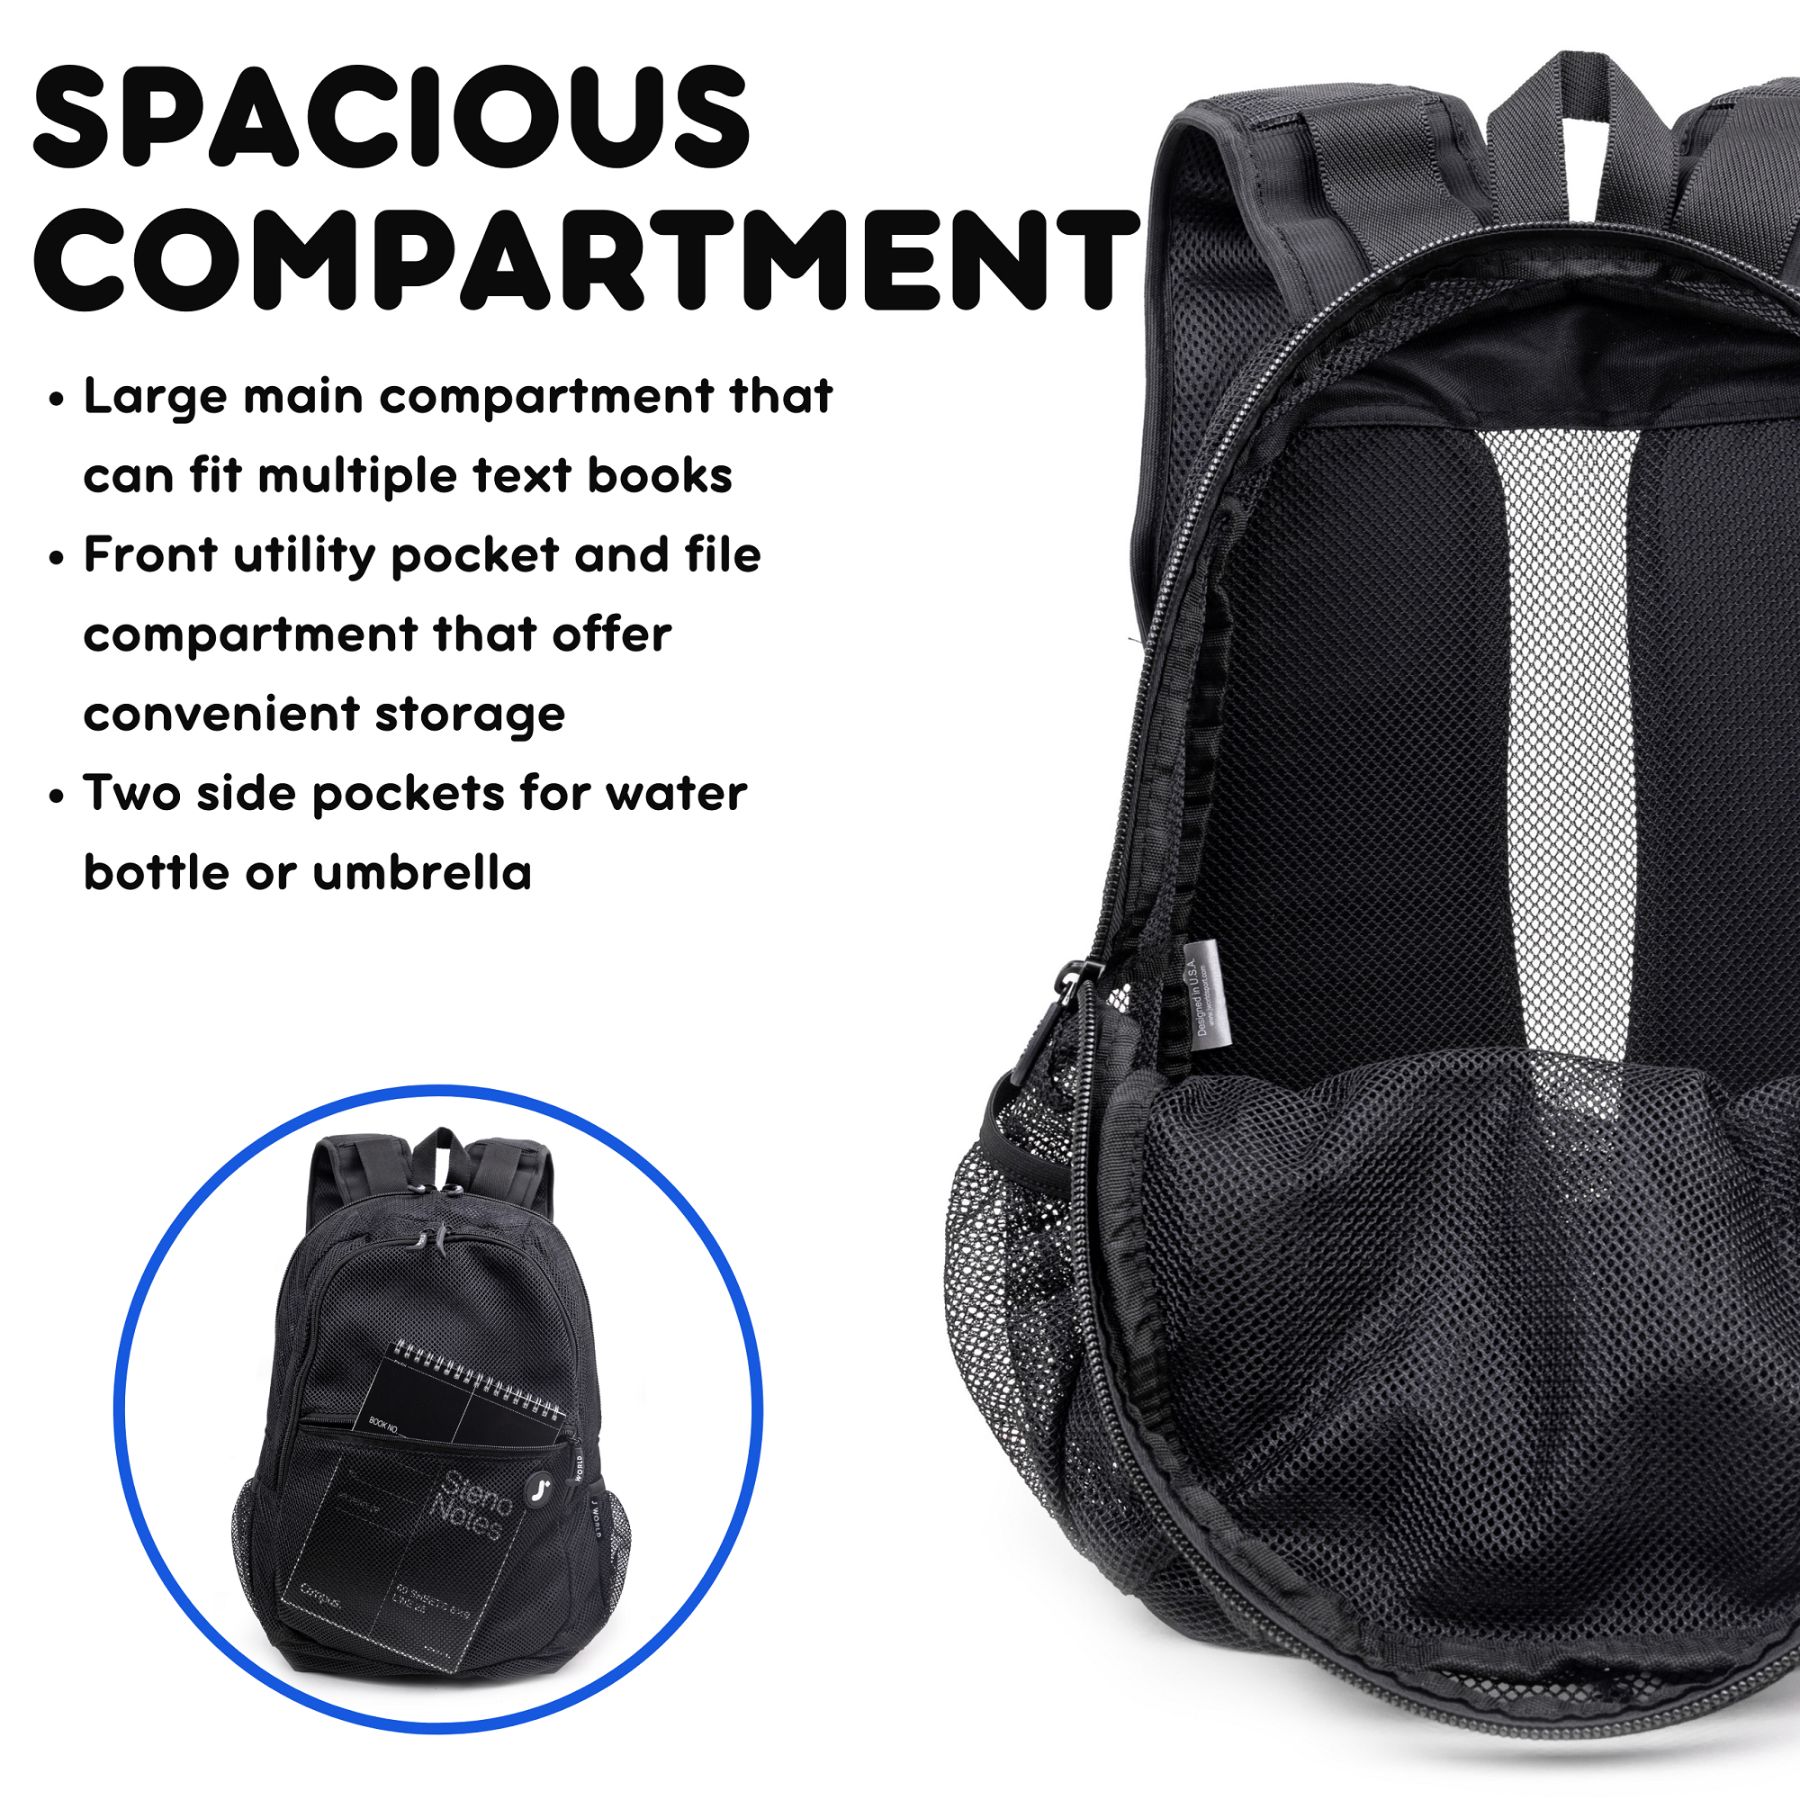 J World 18" Mesh Backpack for School and Travel, Black - image 2 of 7